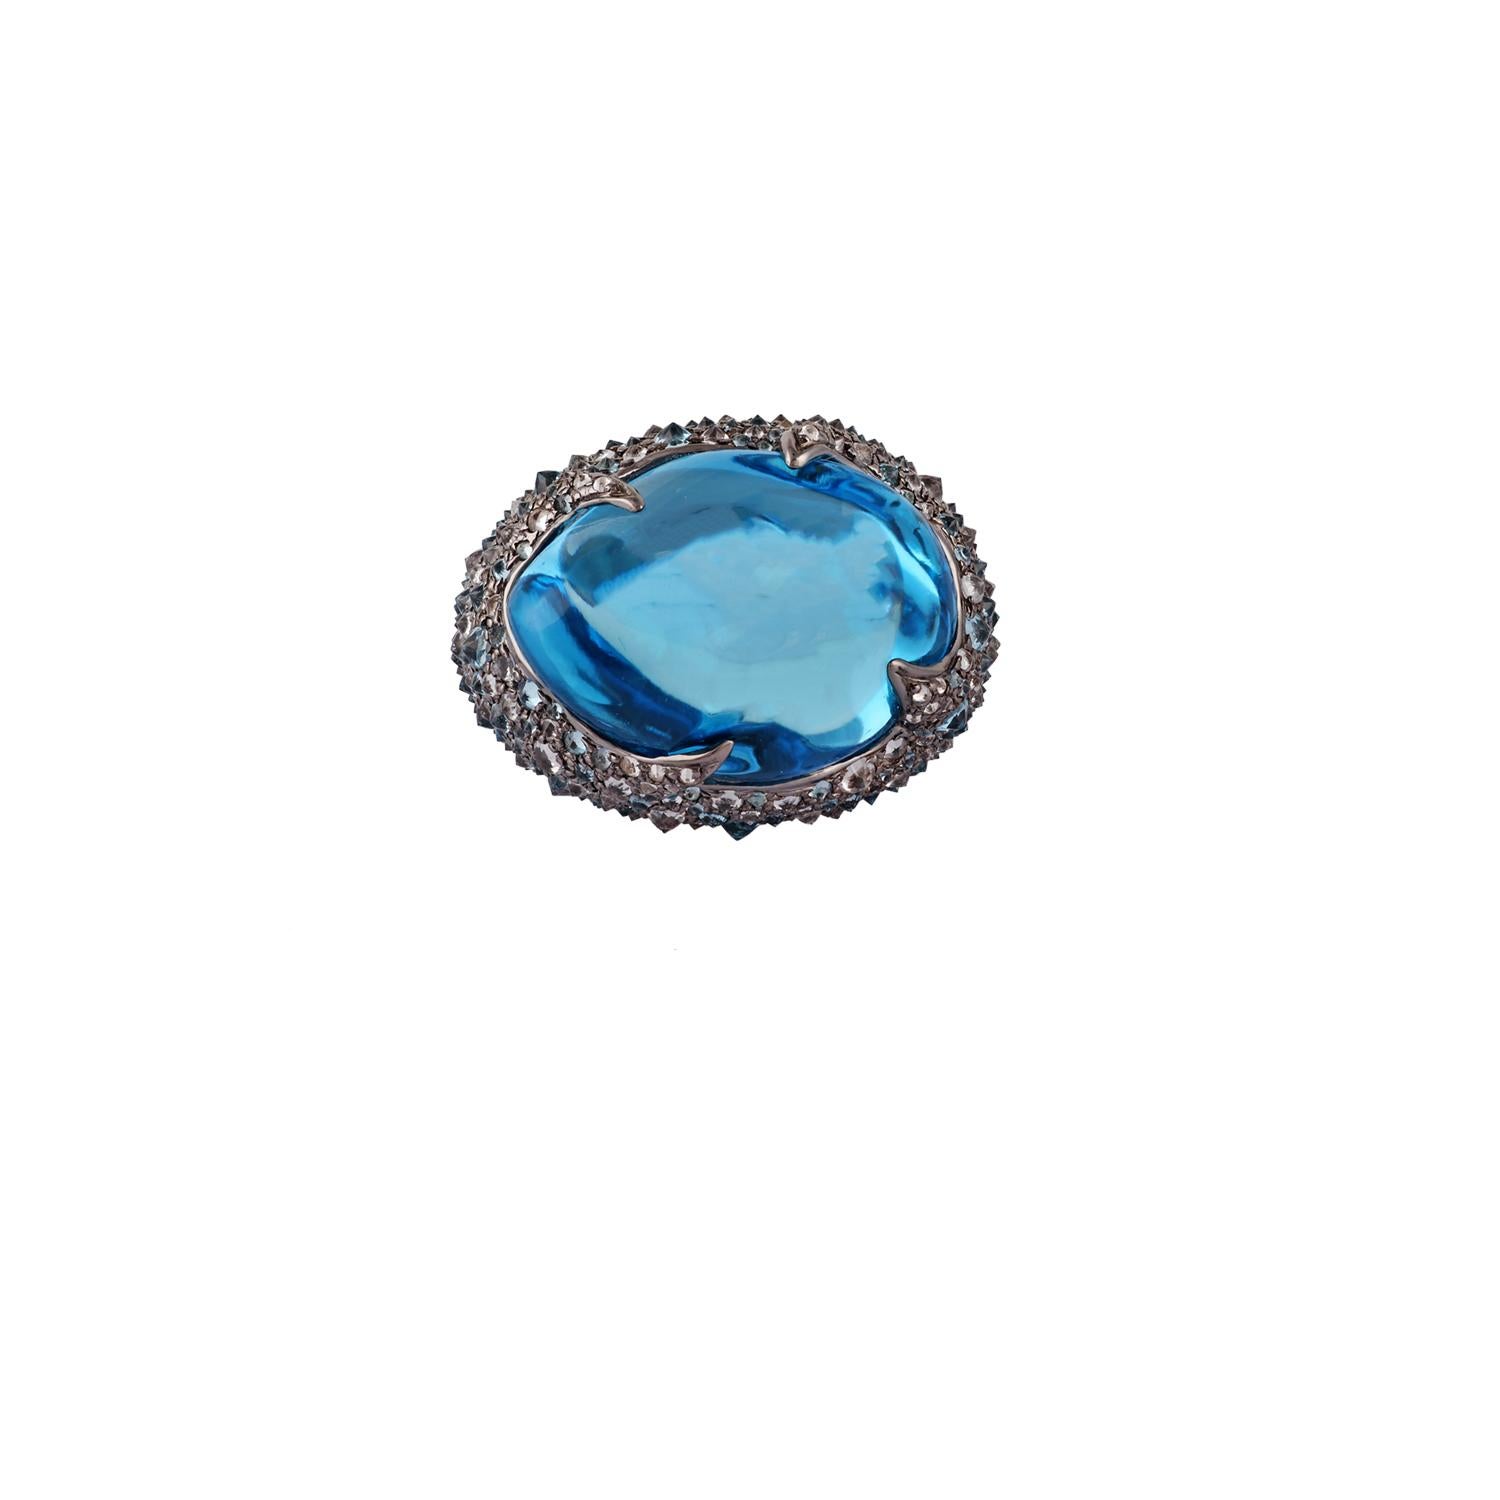 Beautiful Antique Victorian 18K Gold & silver  Blue Topaz, White Topaz, Diamond Ring in Gold & Silver . This incredible cocktail ring is crafted in 18k gold & silver . The center holds a natural vibrant Blue Topaz with an incredible play of color